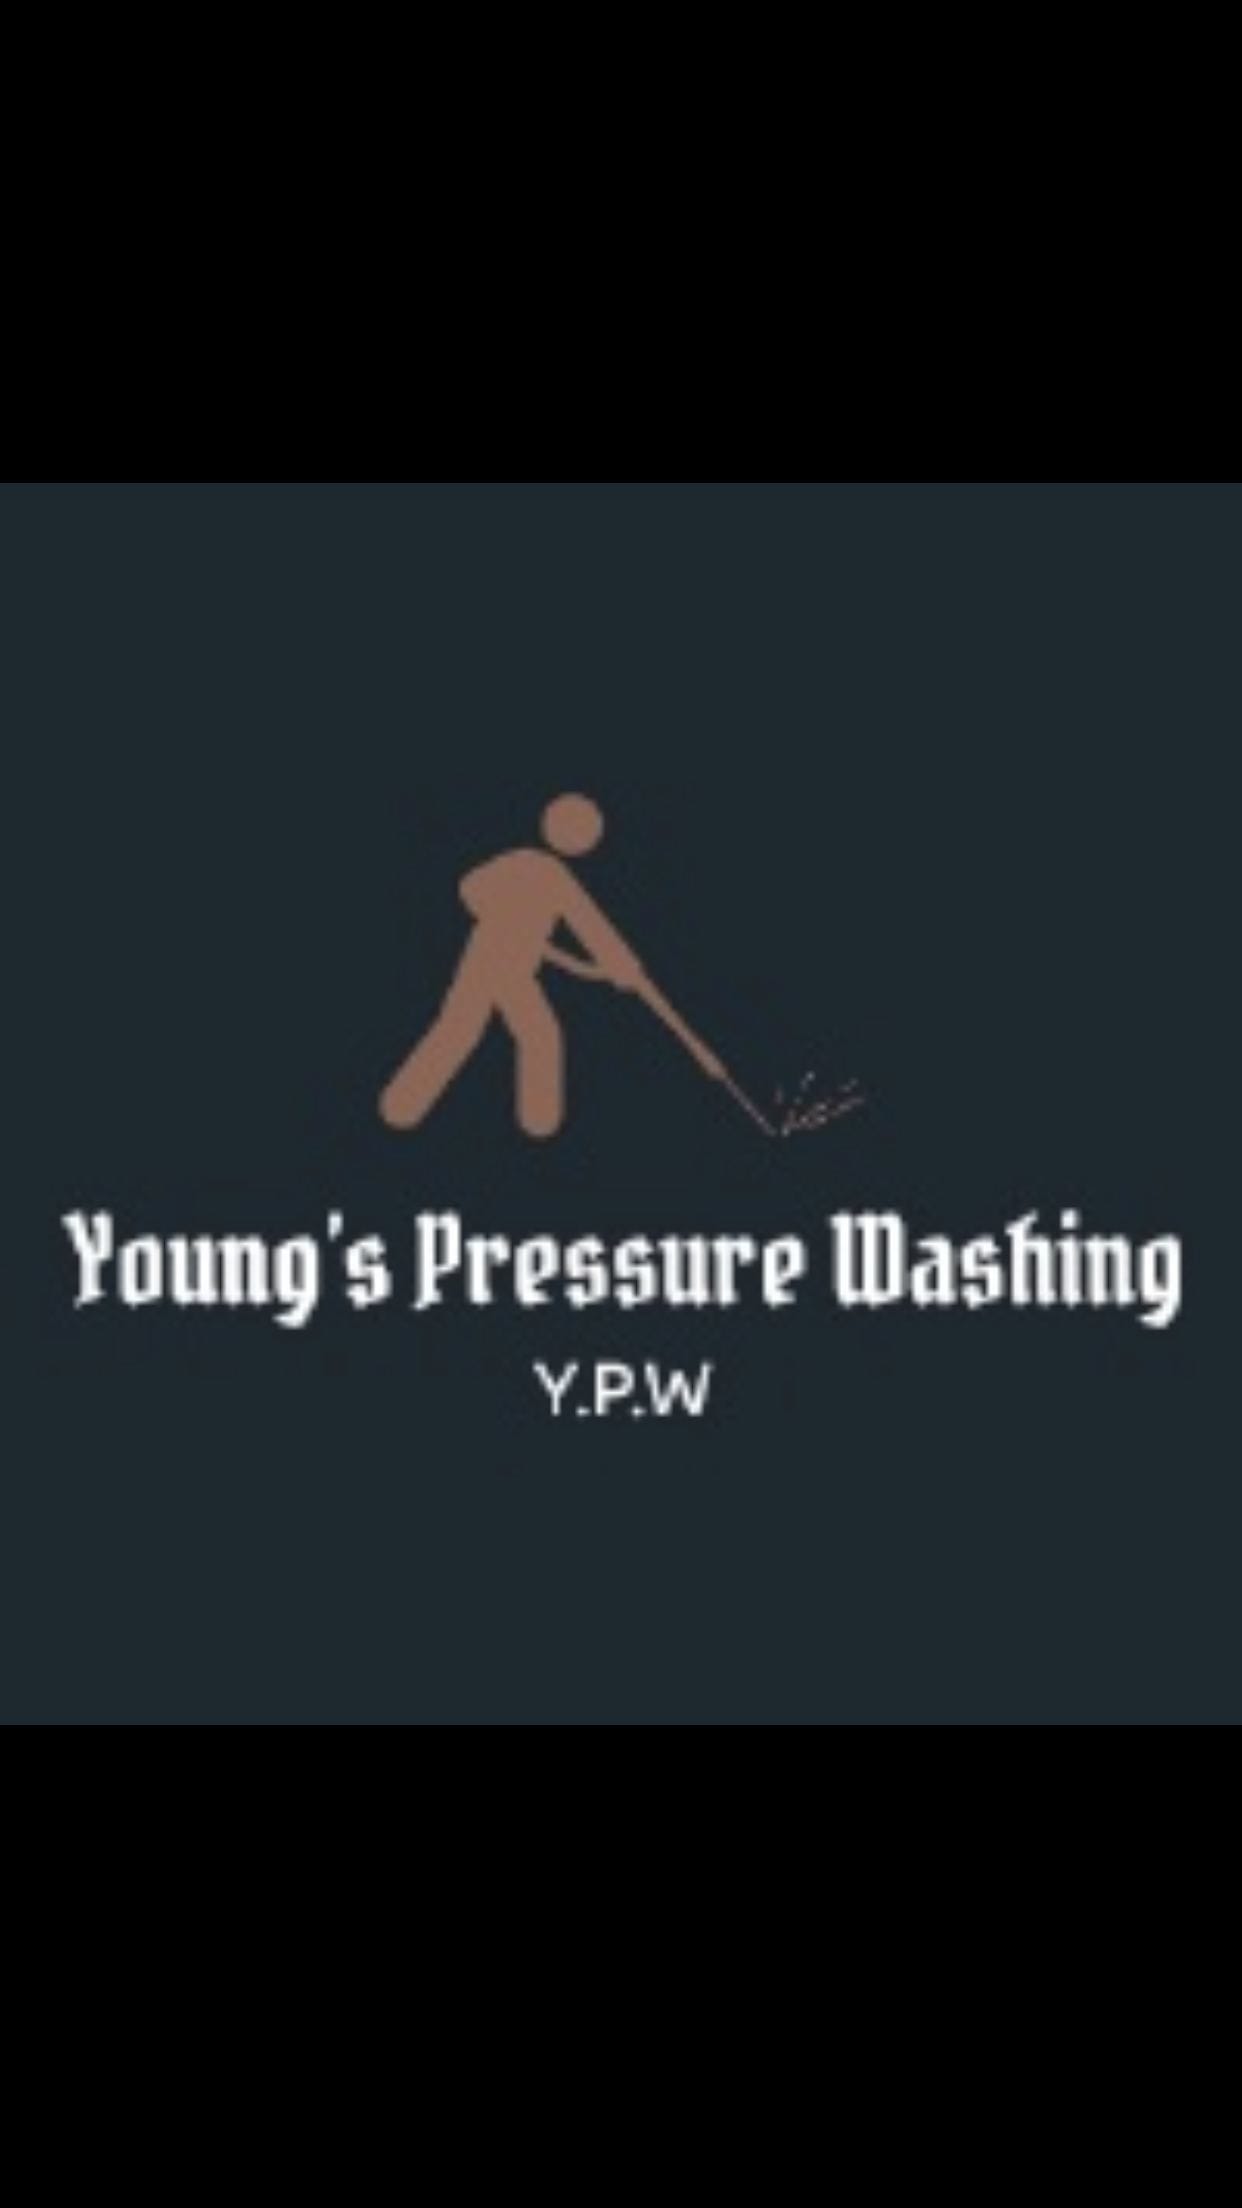 Young’s Pressure Washing